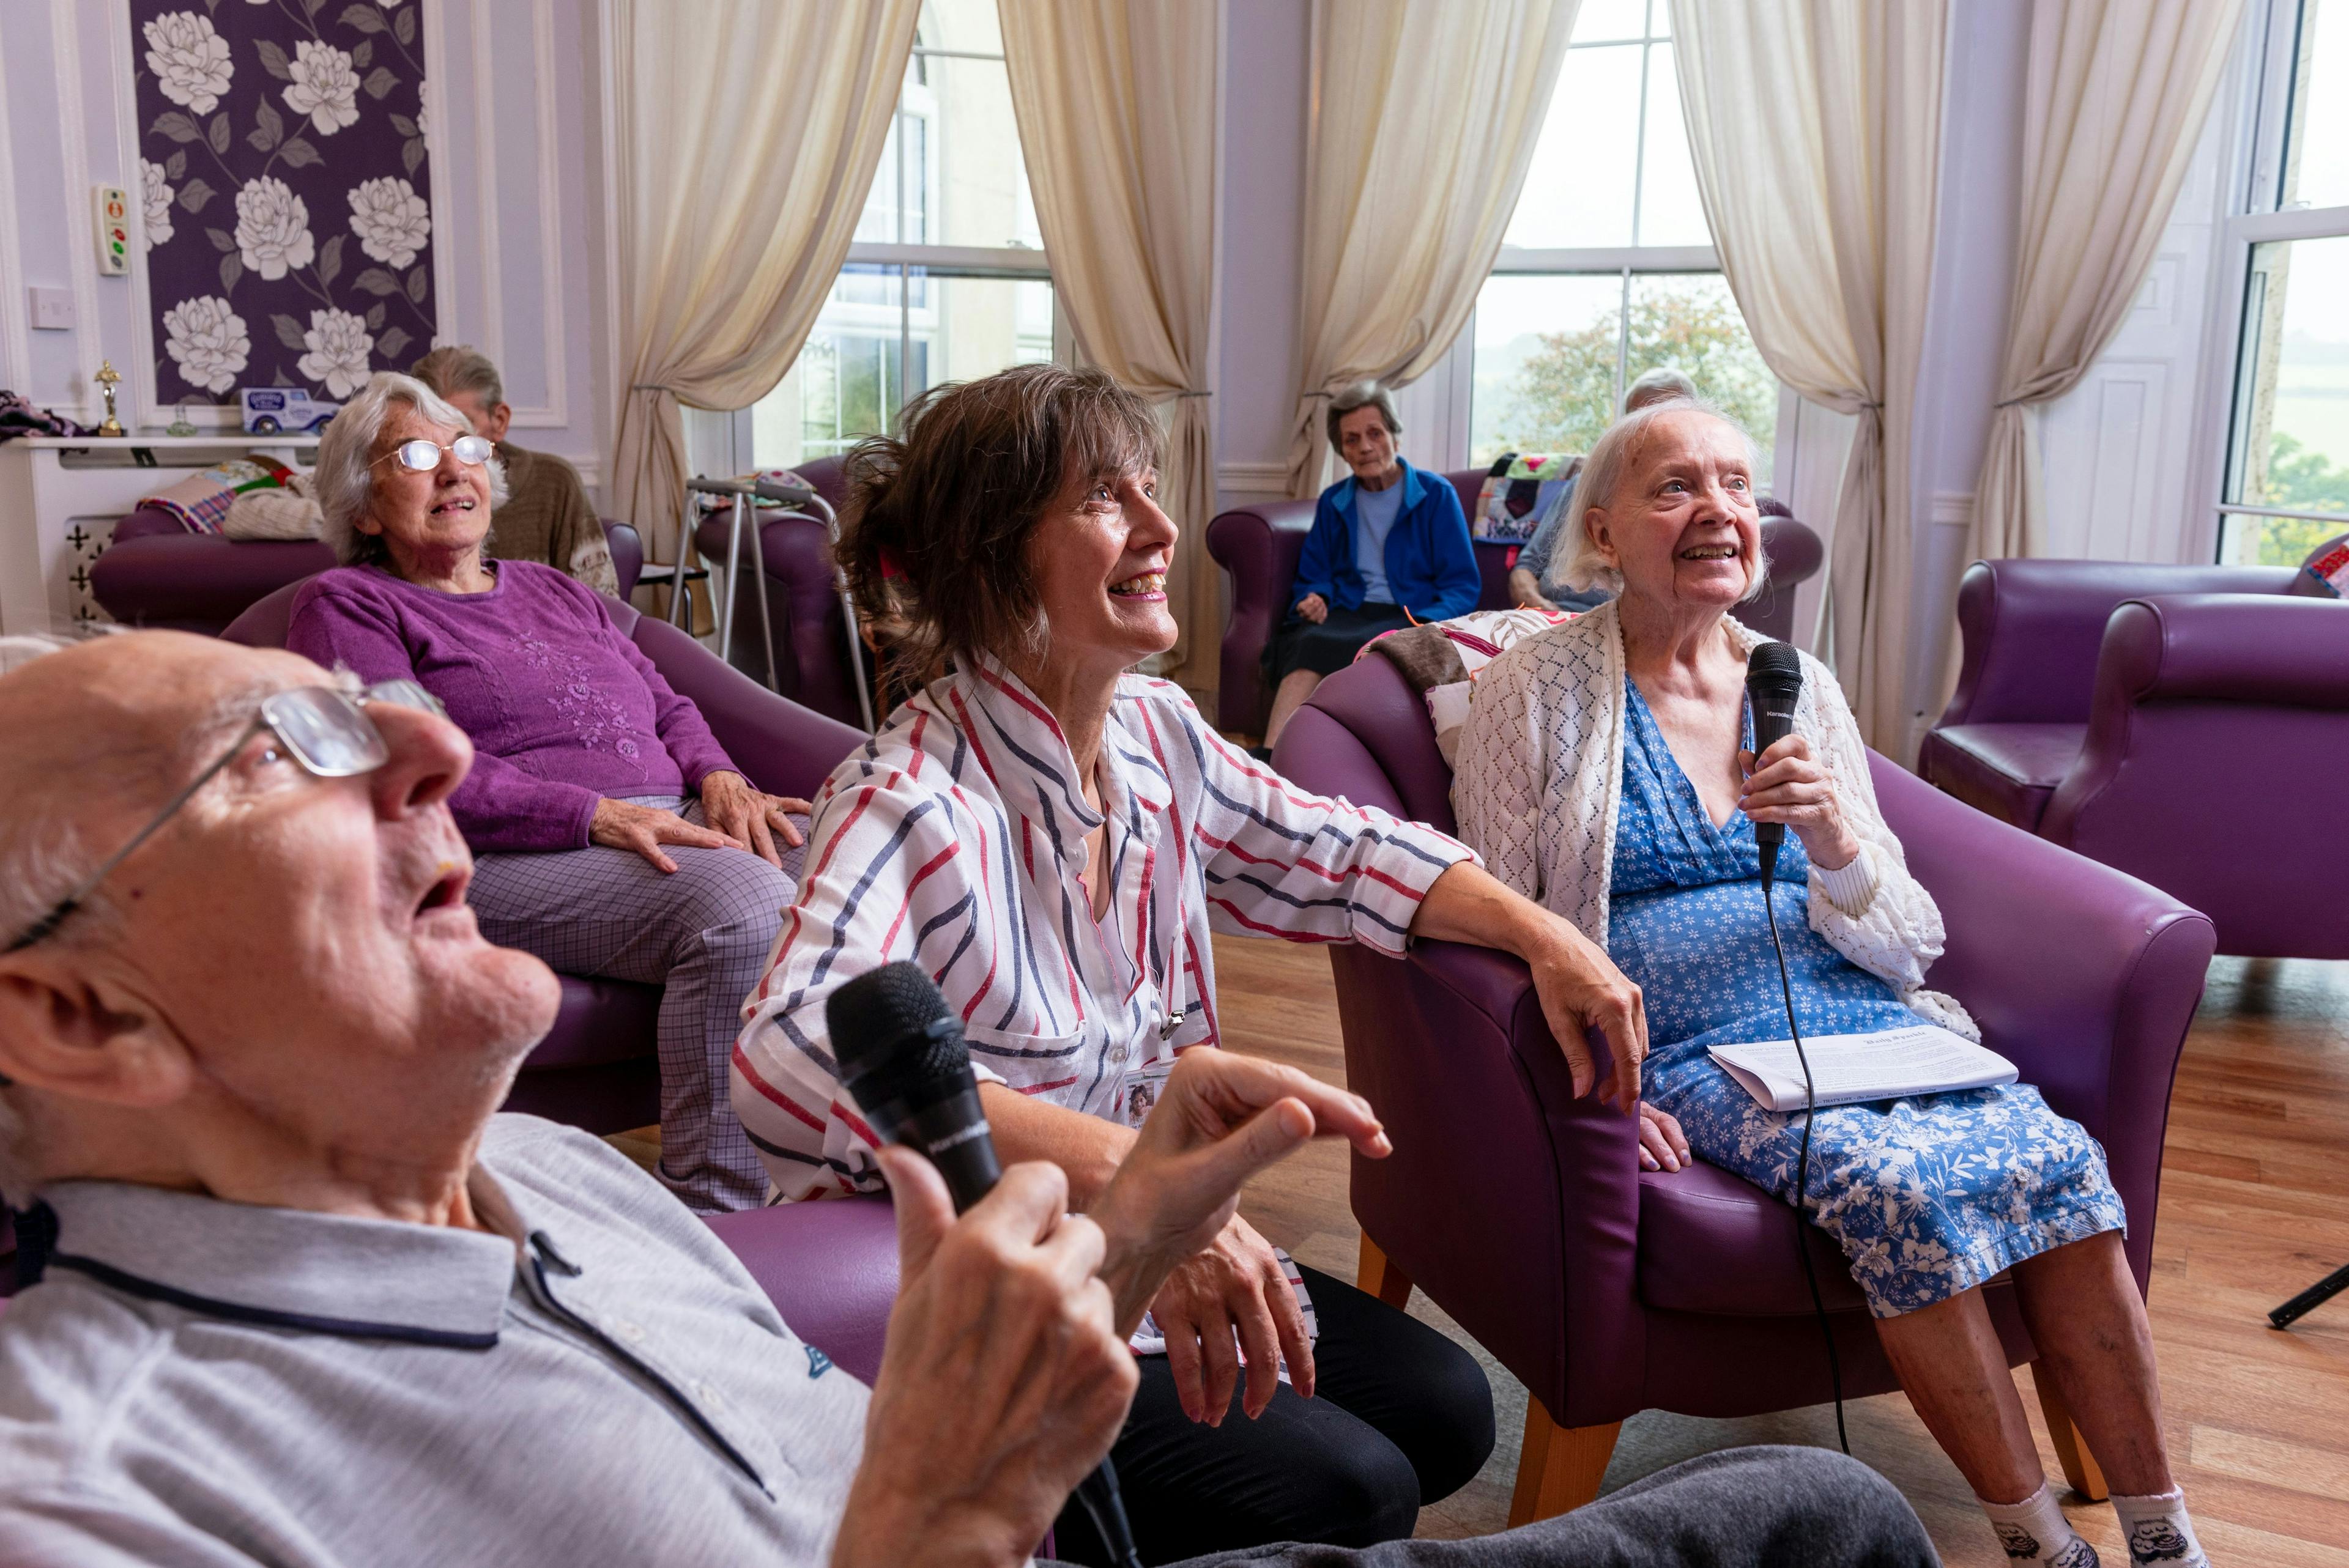 Residents of Woodlands Park care home in Great Missenden, Buckinghamshire